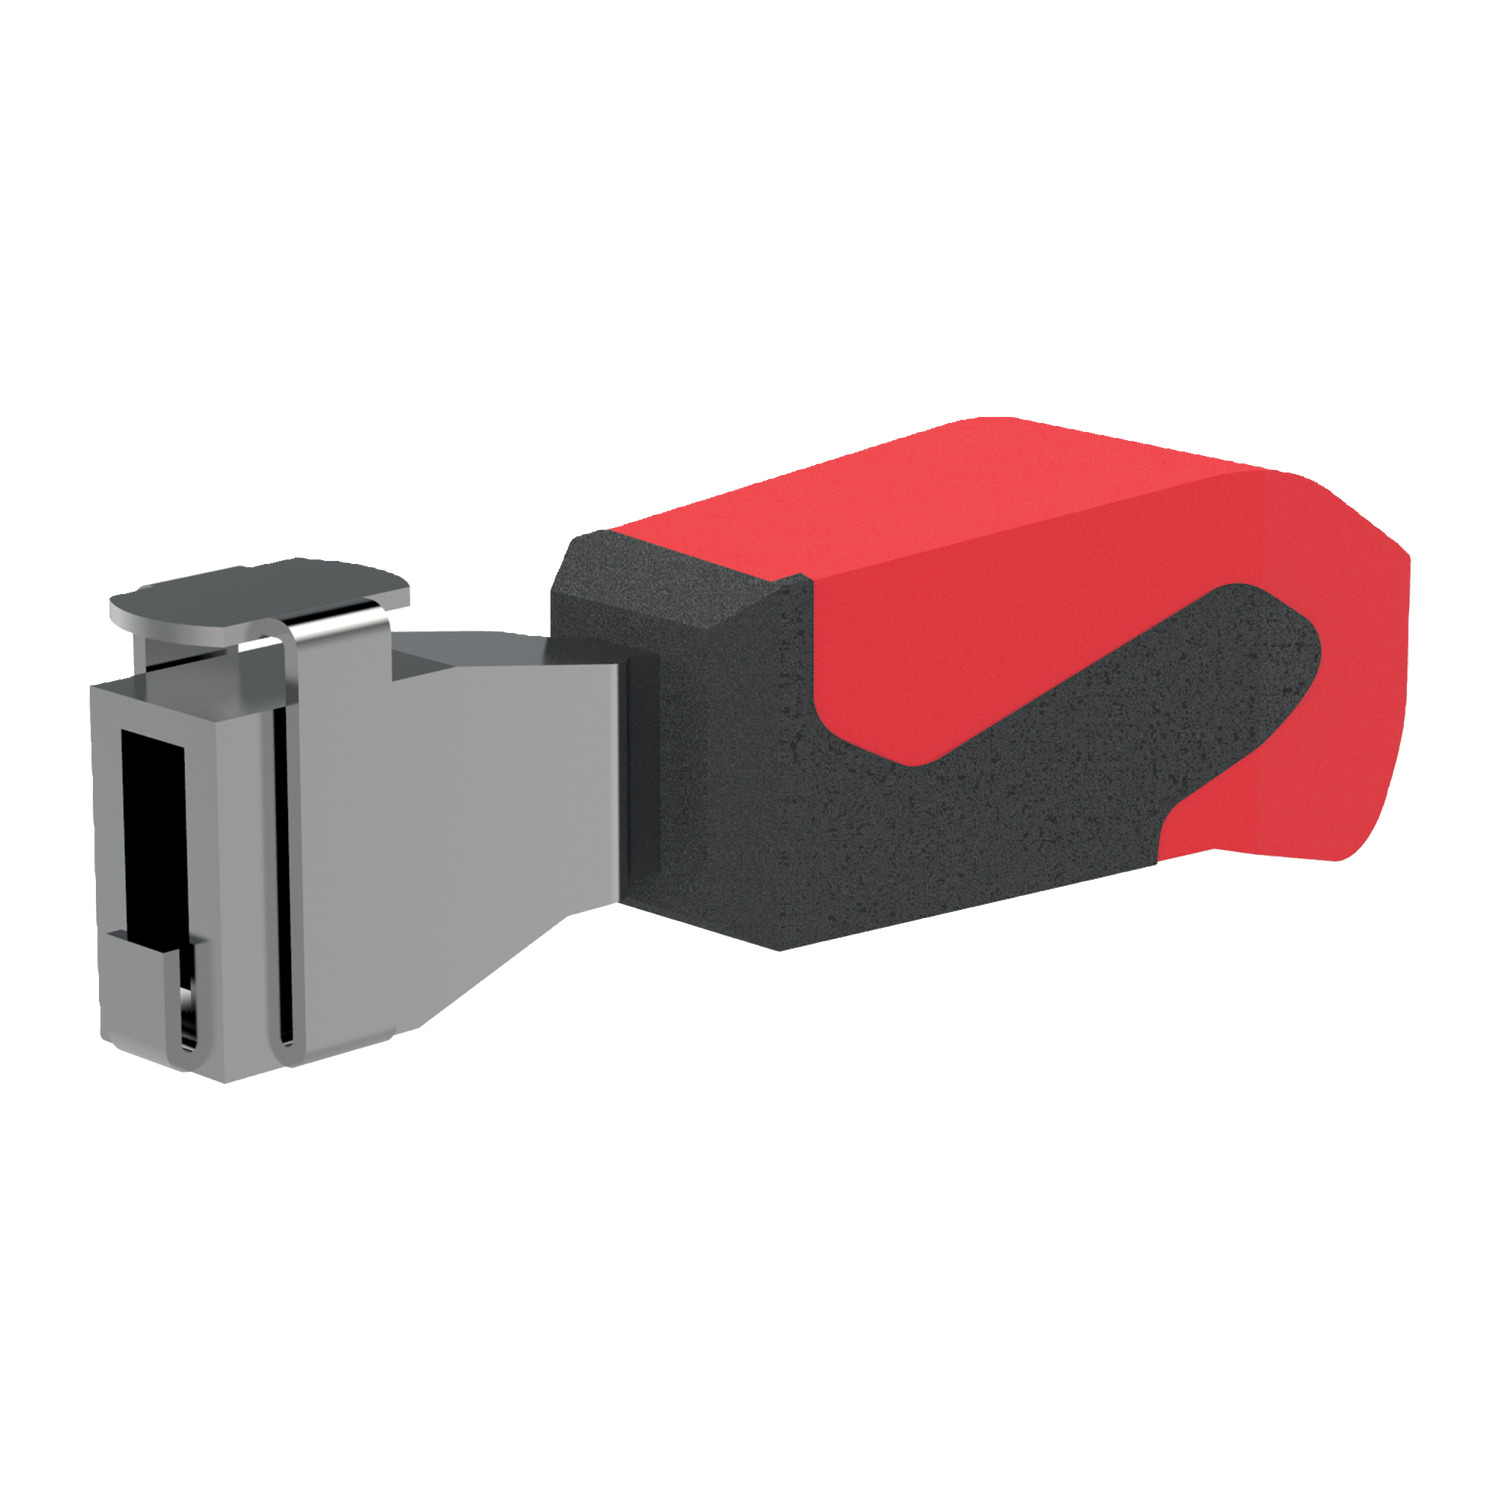 41005.2 - Red Handle - Removable